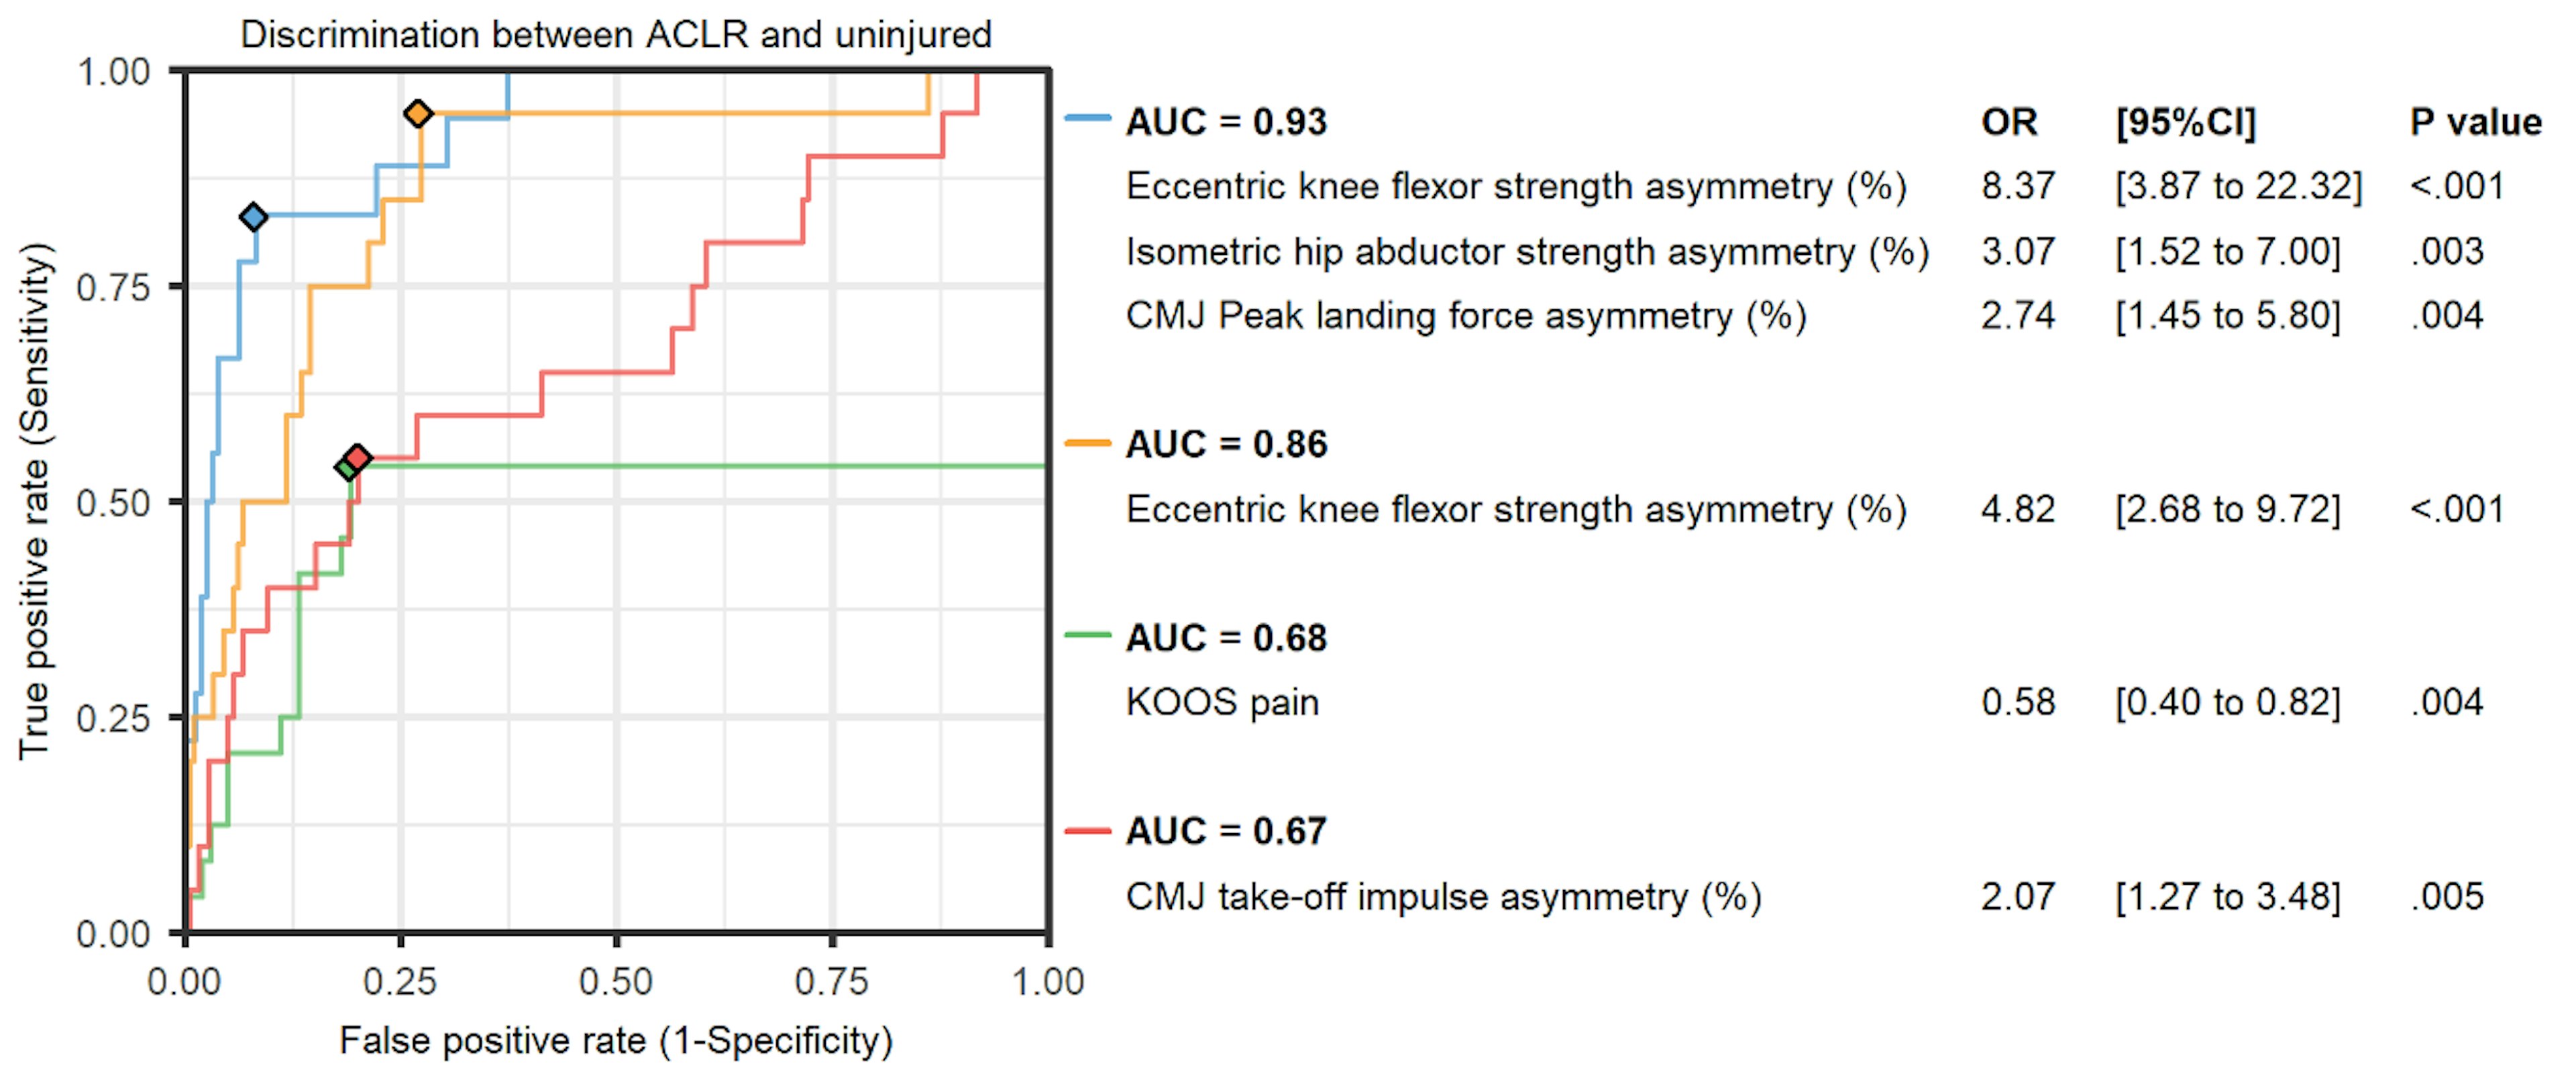 Figure 4. Receiver operating characteristic curves for univariable and multivariable logistic regression models summarizing their ability to discriminate between players with and without a history of anterior cruciate ligament reconstruction (ACLR). Figure replicated from Collings et al 2021.